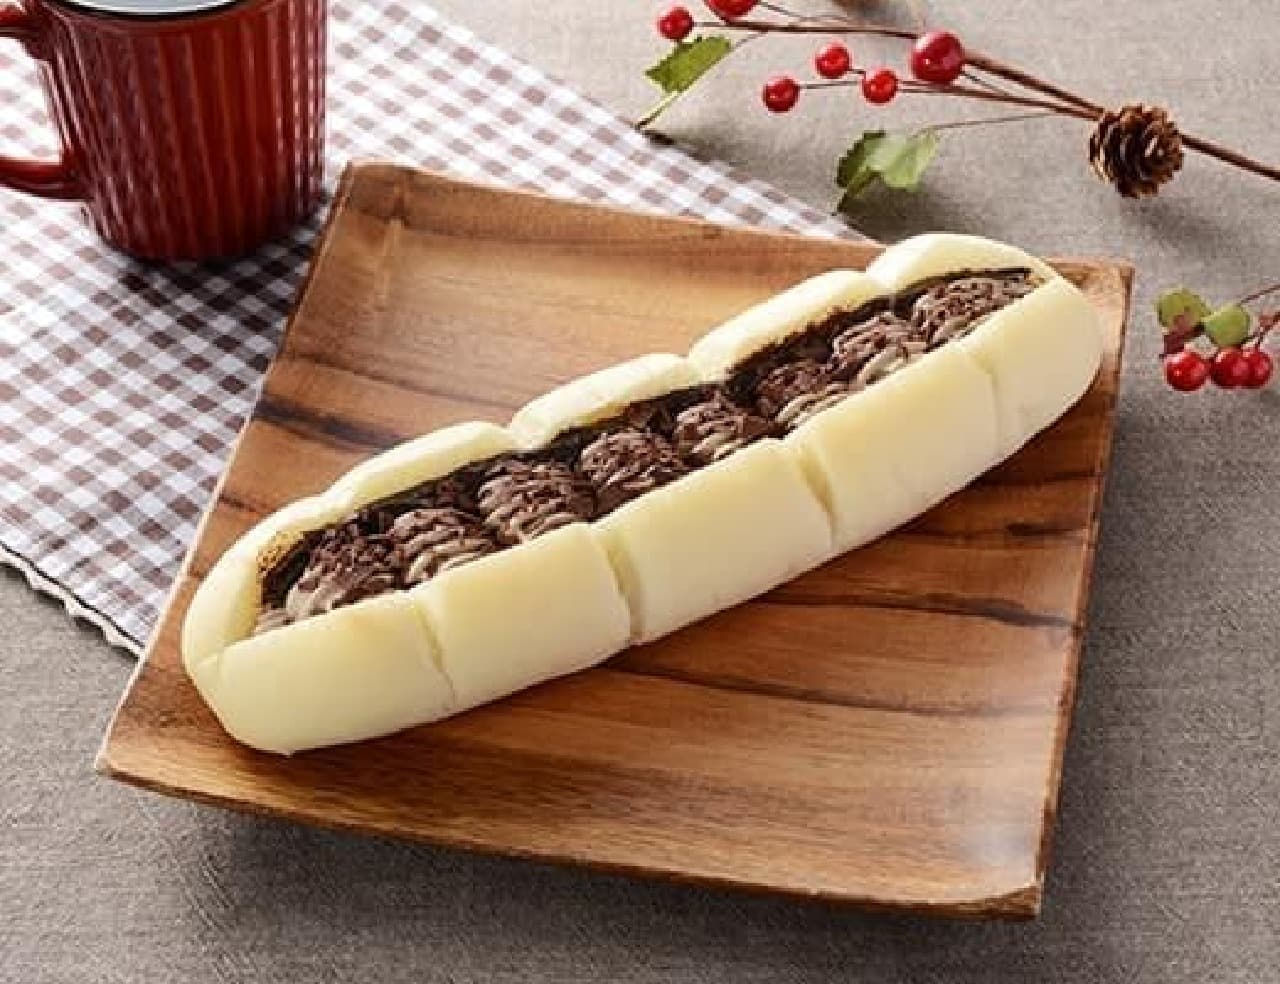 Lawson "Belgian chocolate whipped roll"